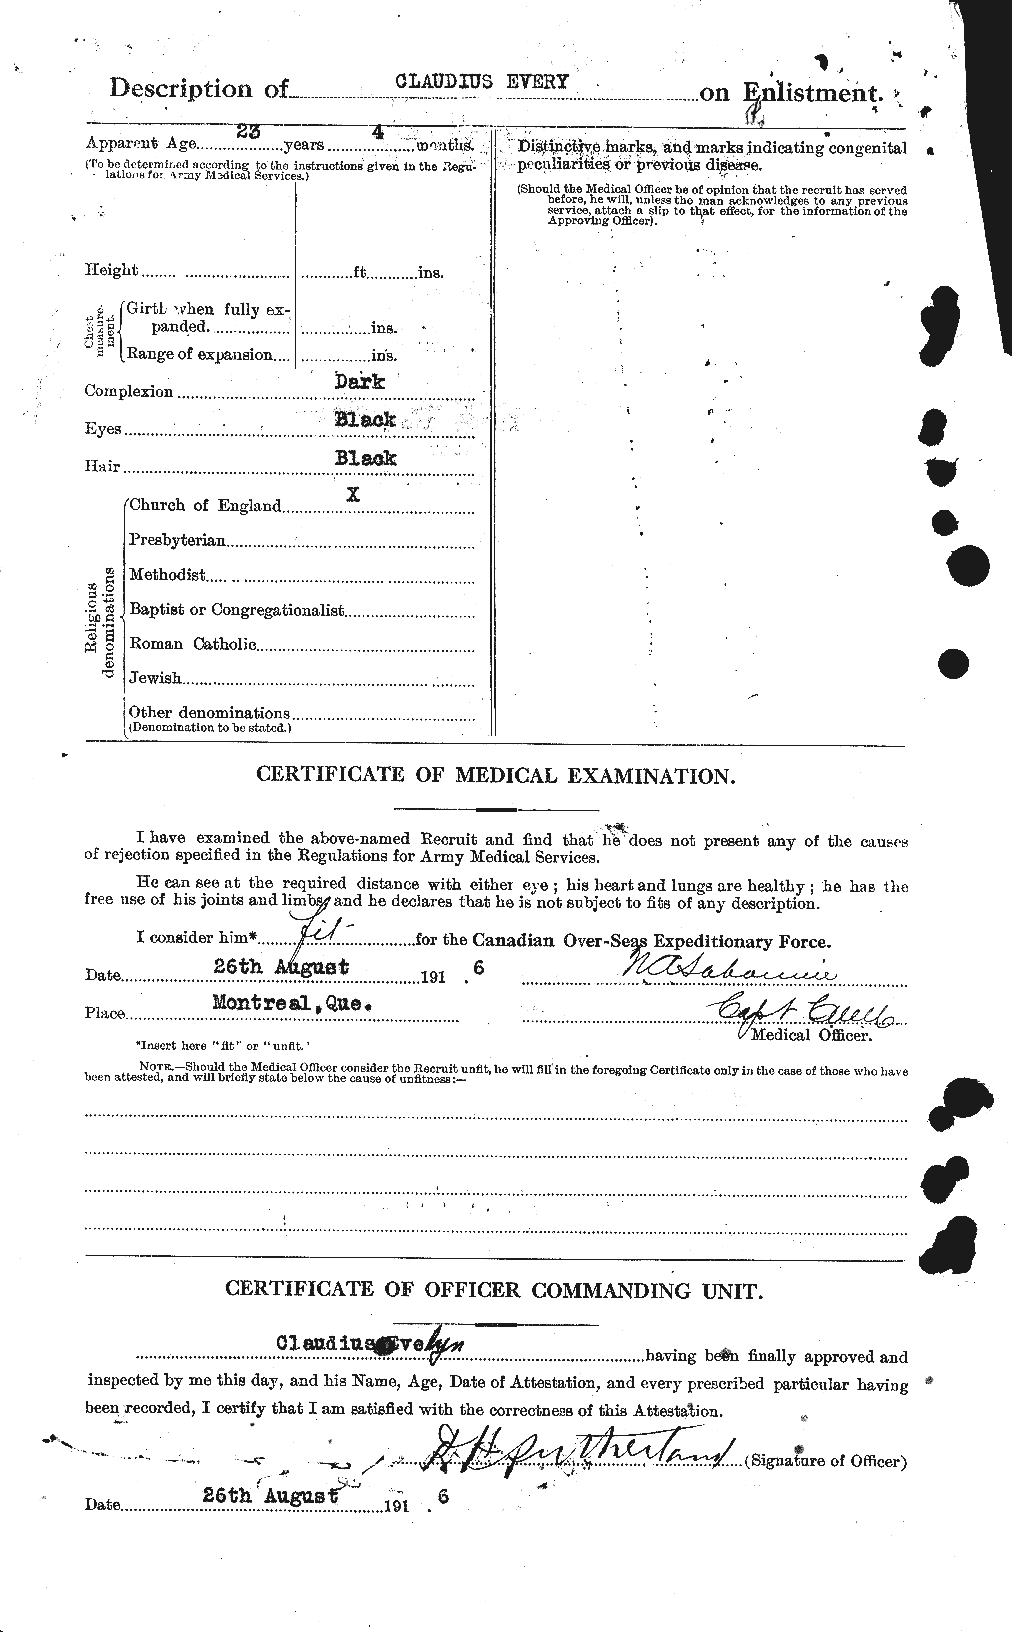 Personnel Records of the First World War - CEF 315717b